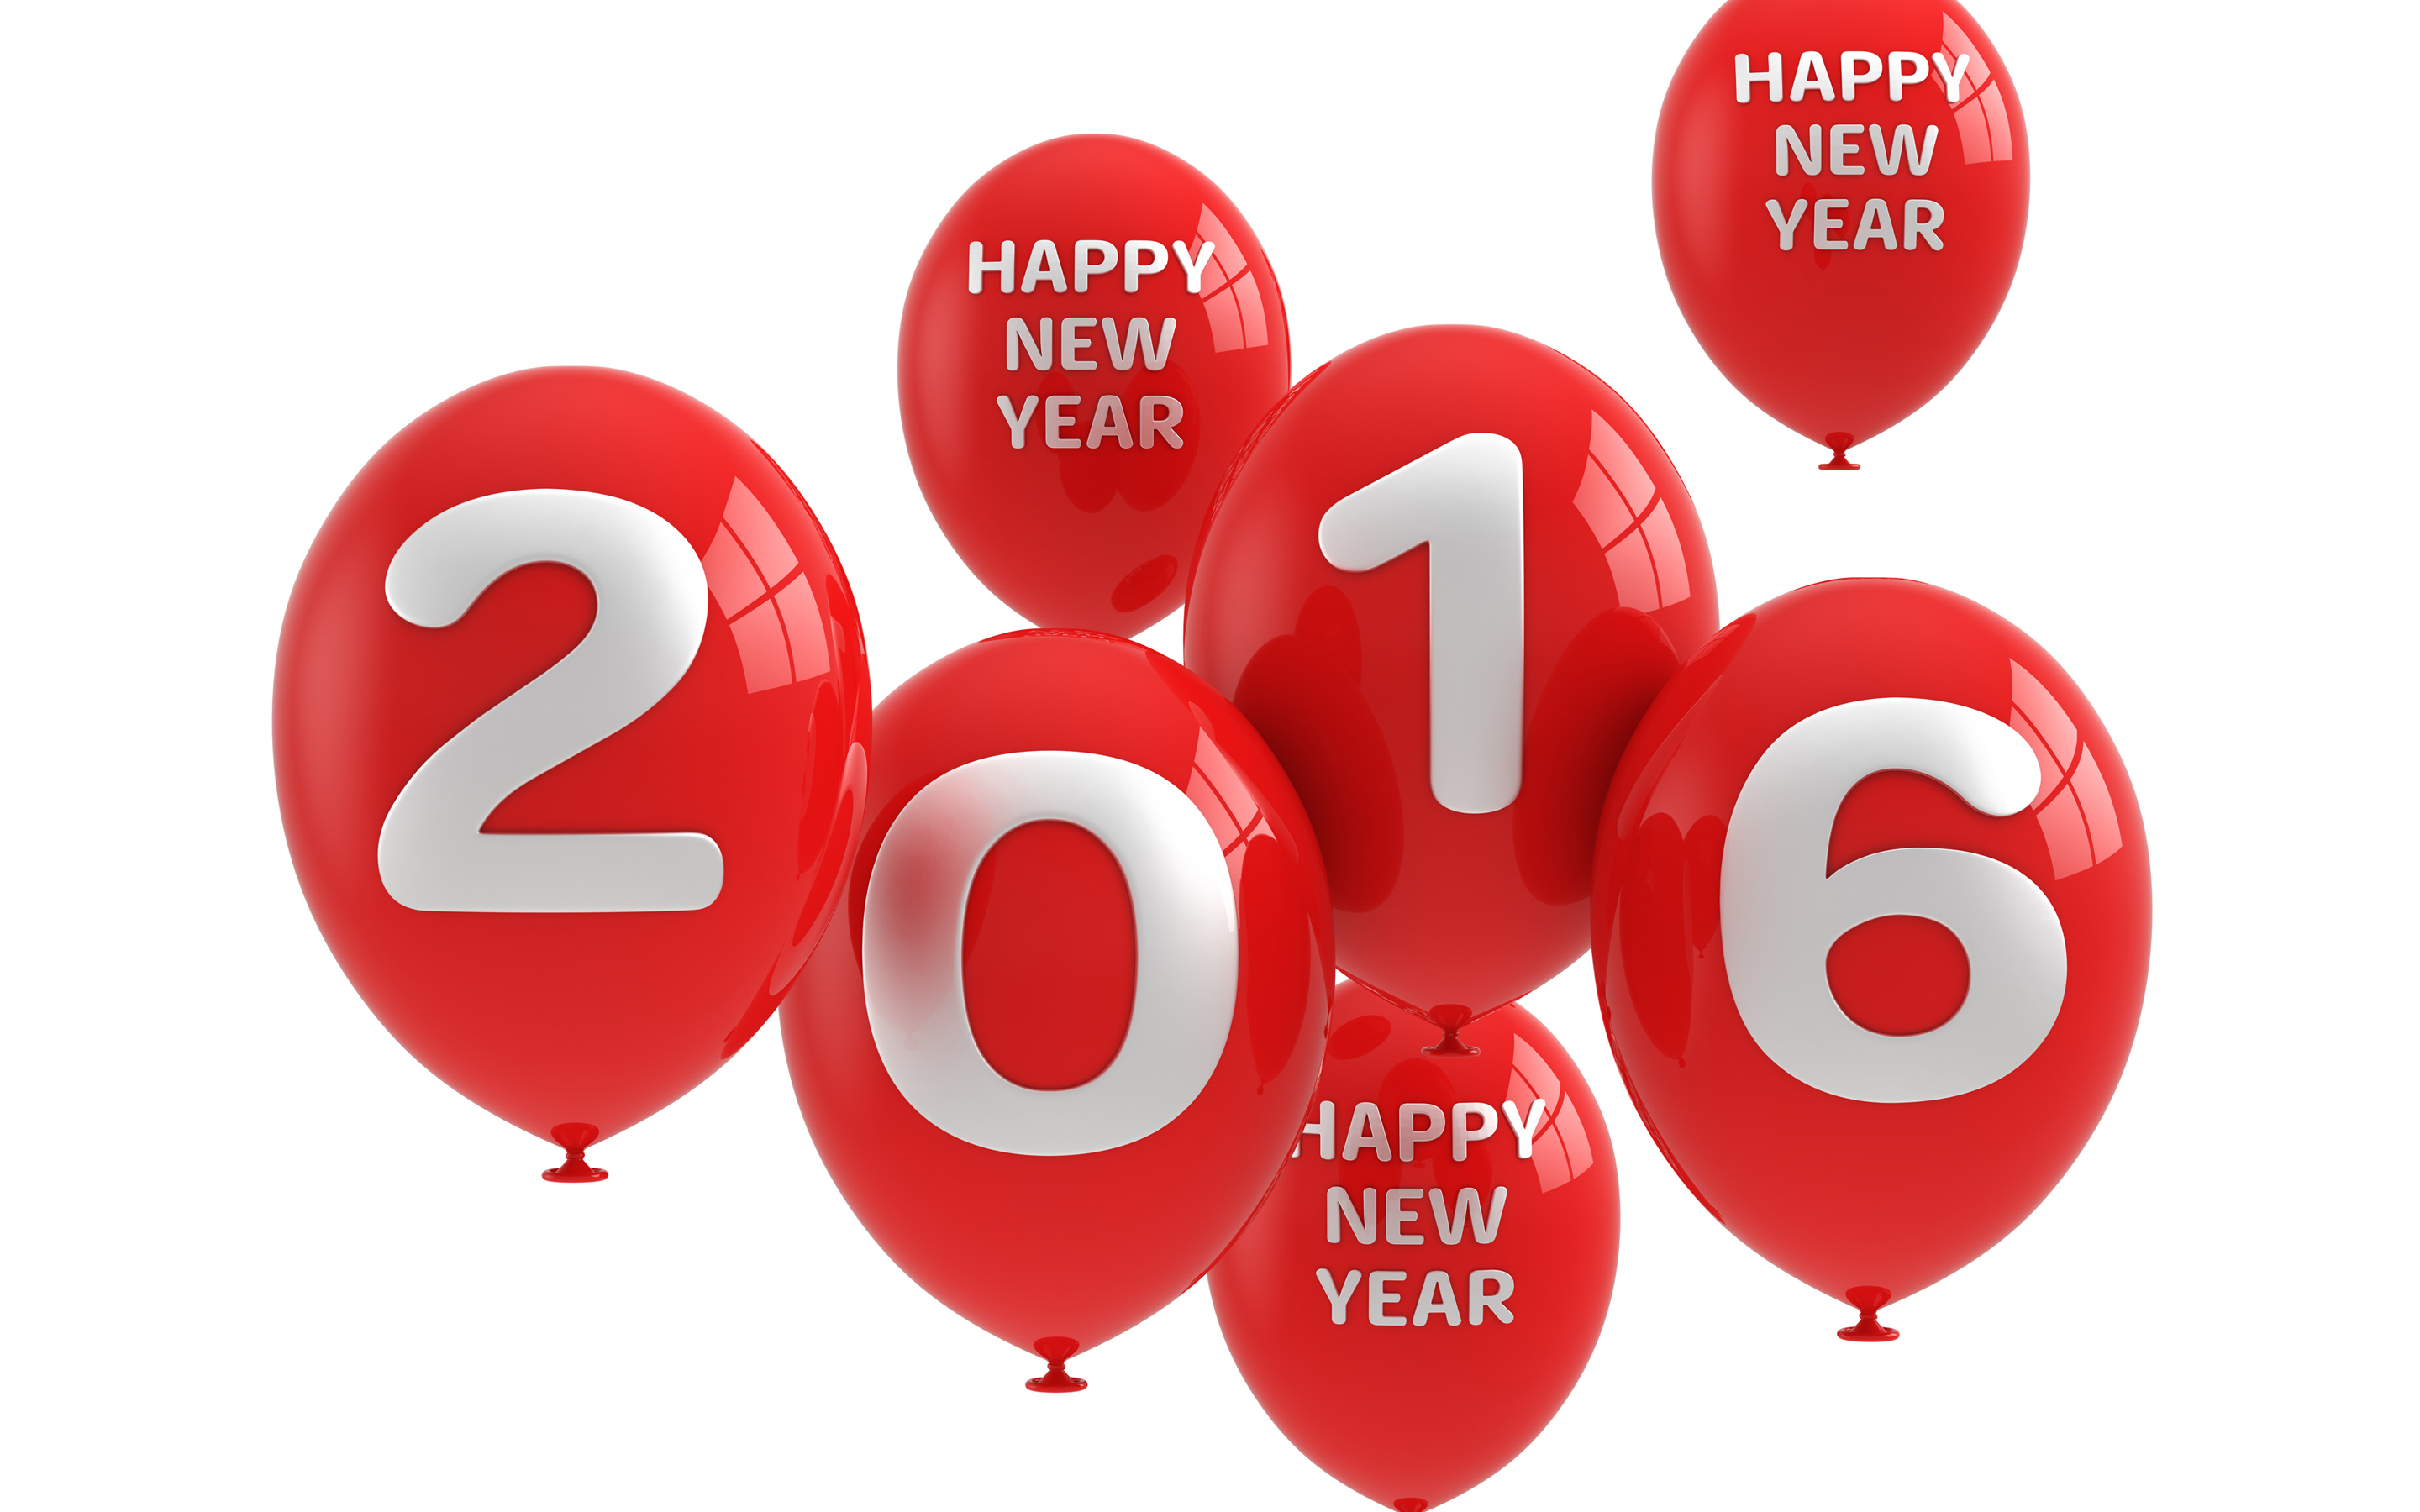 2016 Happy New Year Balloons Wallpapers HD Wallpapers